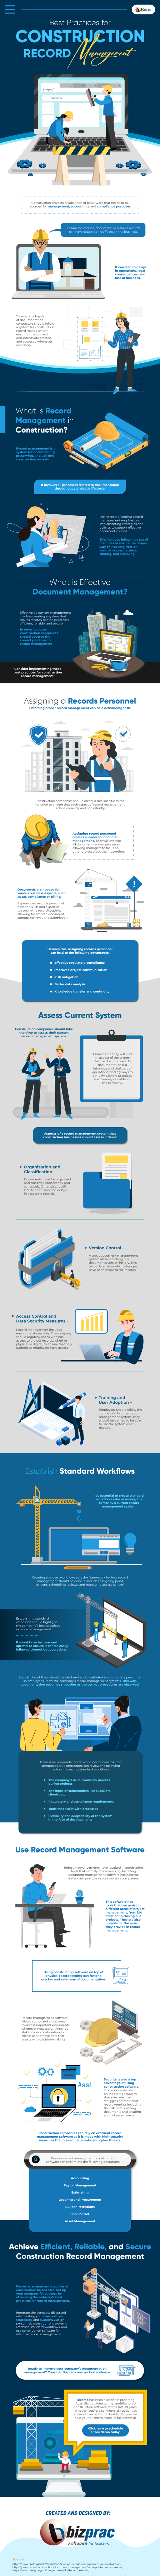 Best-Practices-for-Construction-Record-Management-Infographic-Image